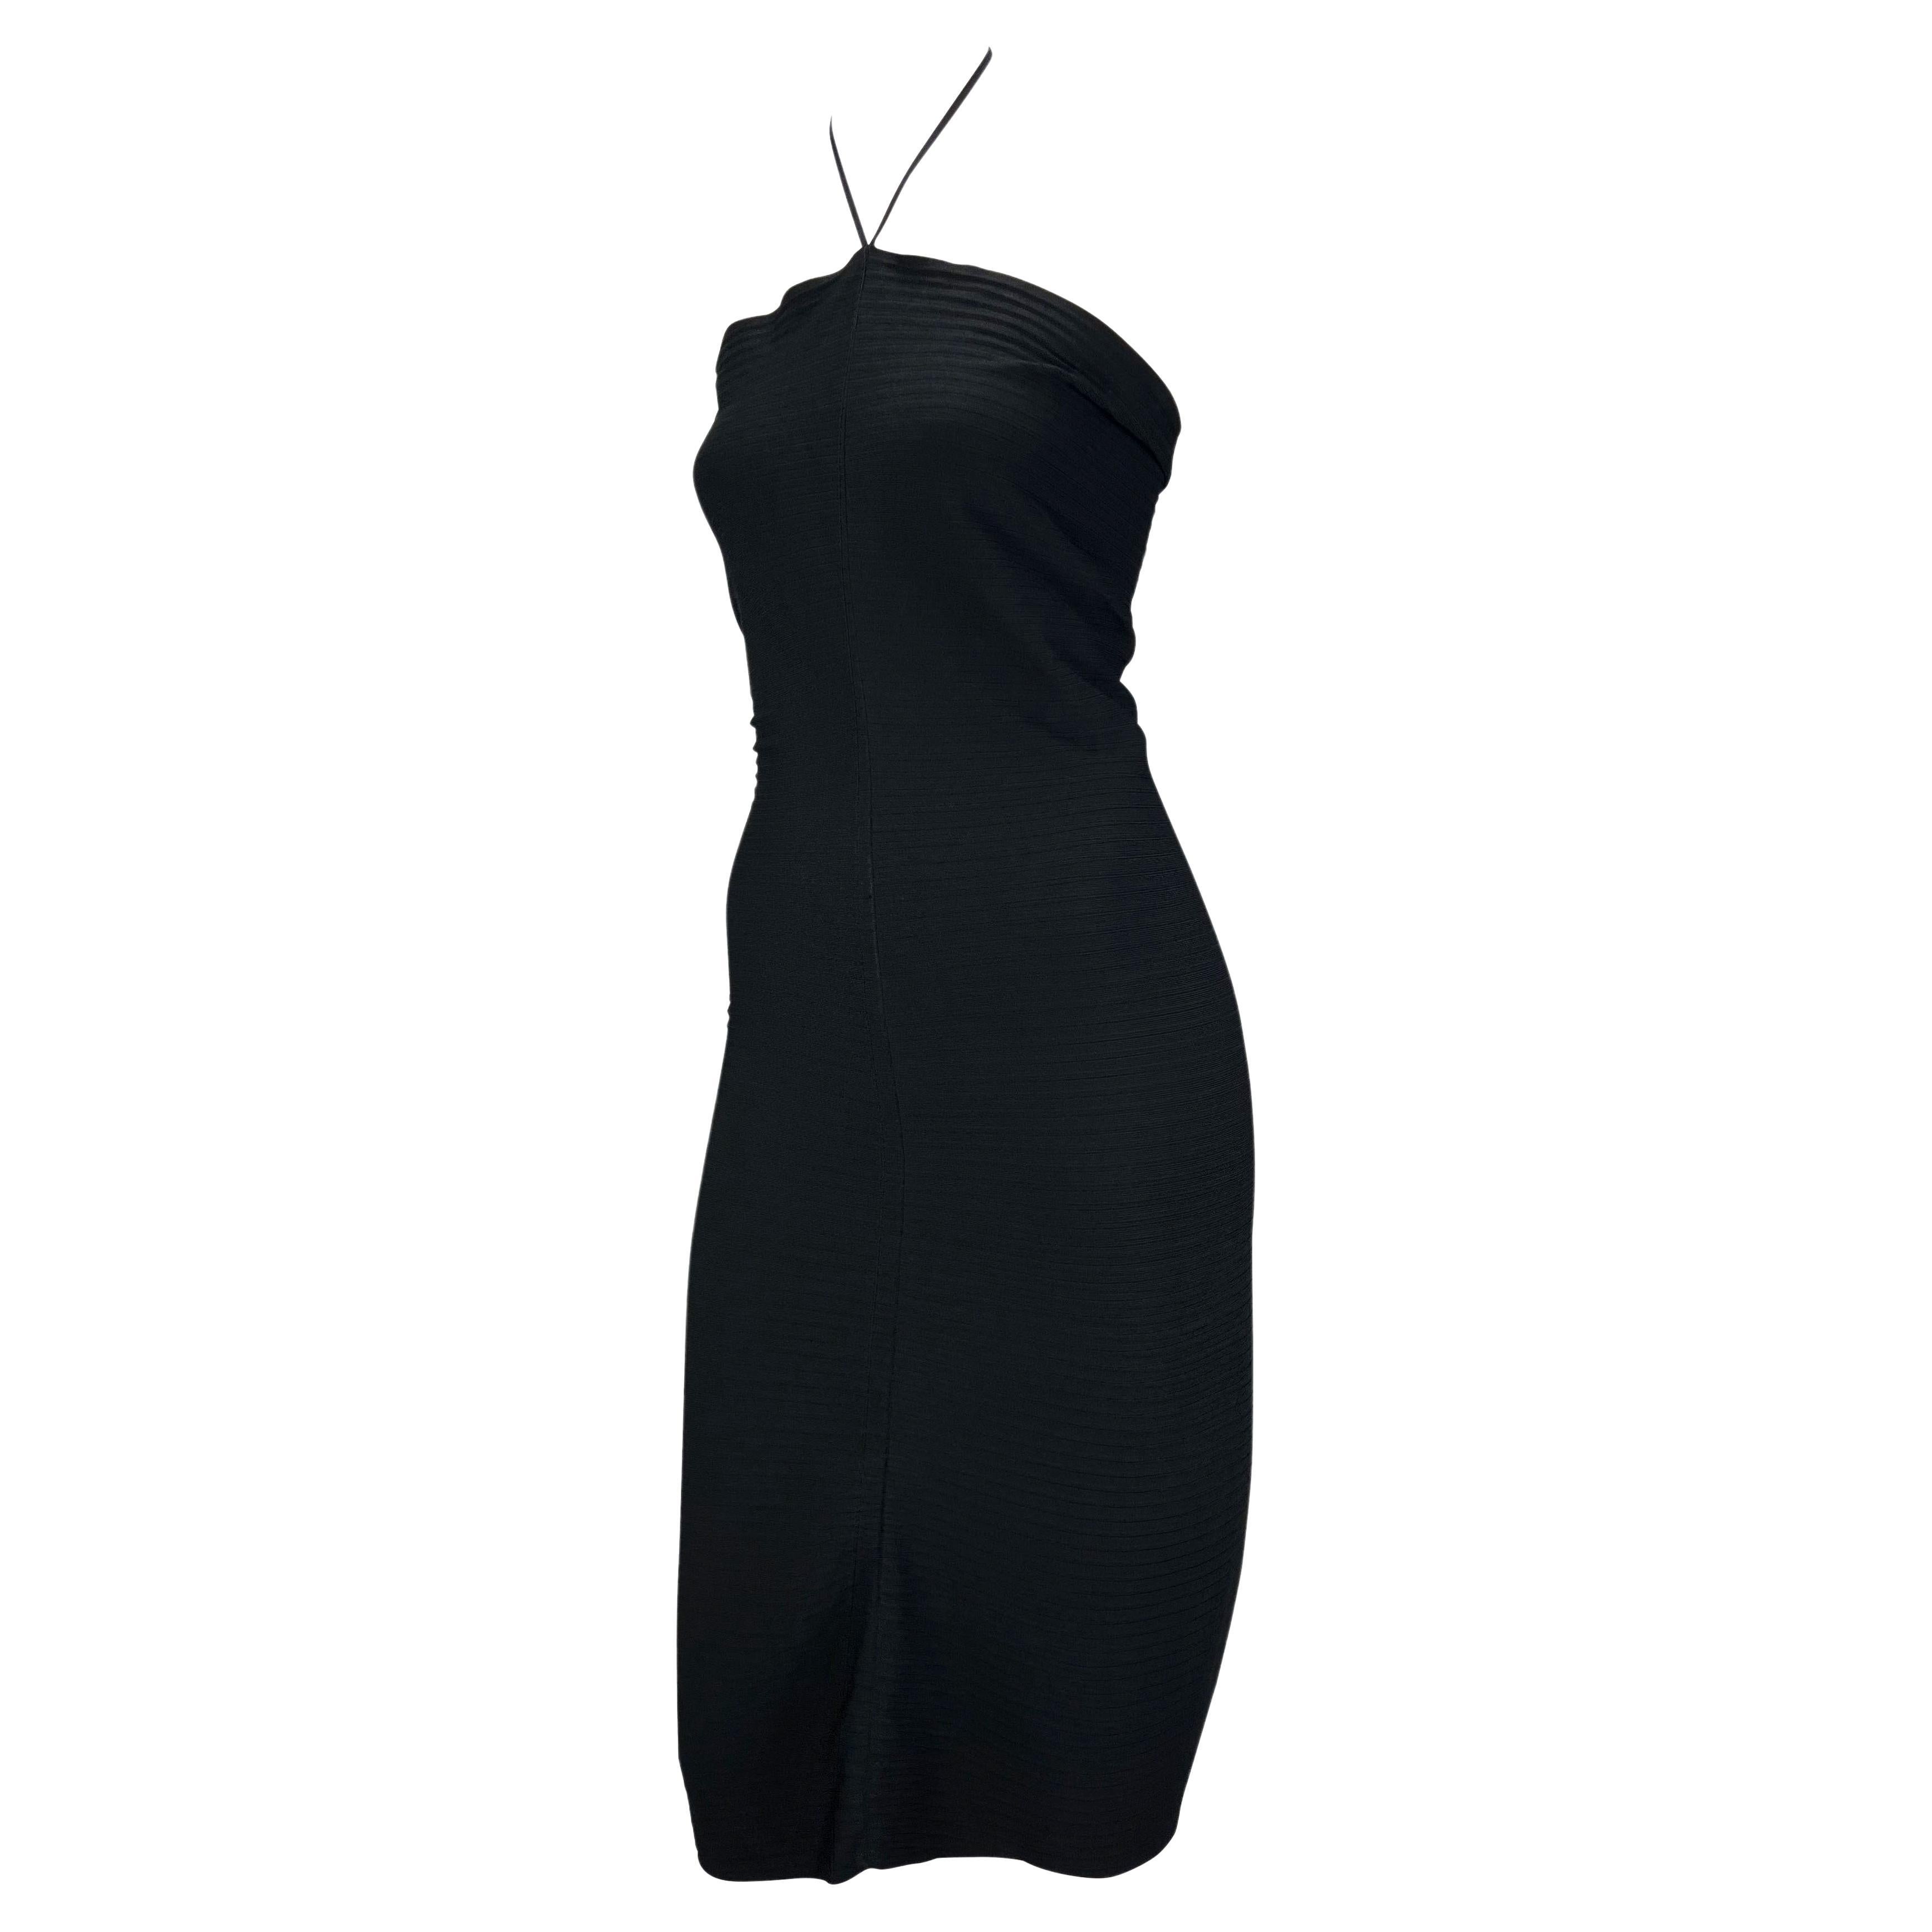 Presenting a black stretch Gucci tube dress, designed by Tom Ford. From the 2000 Spring/Summer collection, this stunning form-fitting dress is made complete with a halterneck with a 'Gucci' stamped metal closure at the neck. This ultra-chic dress is